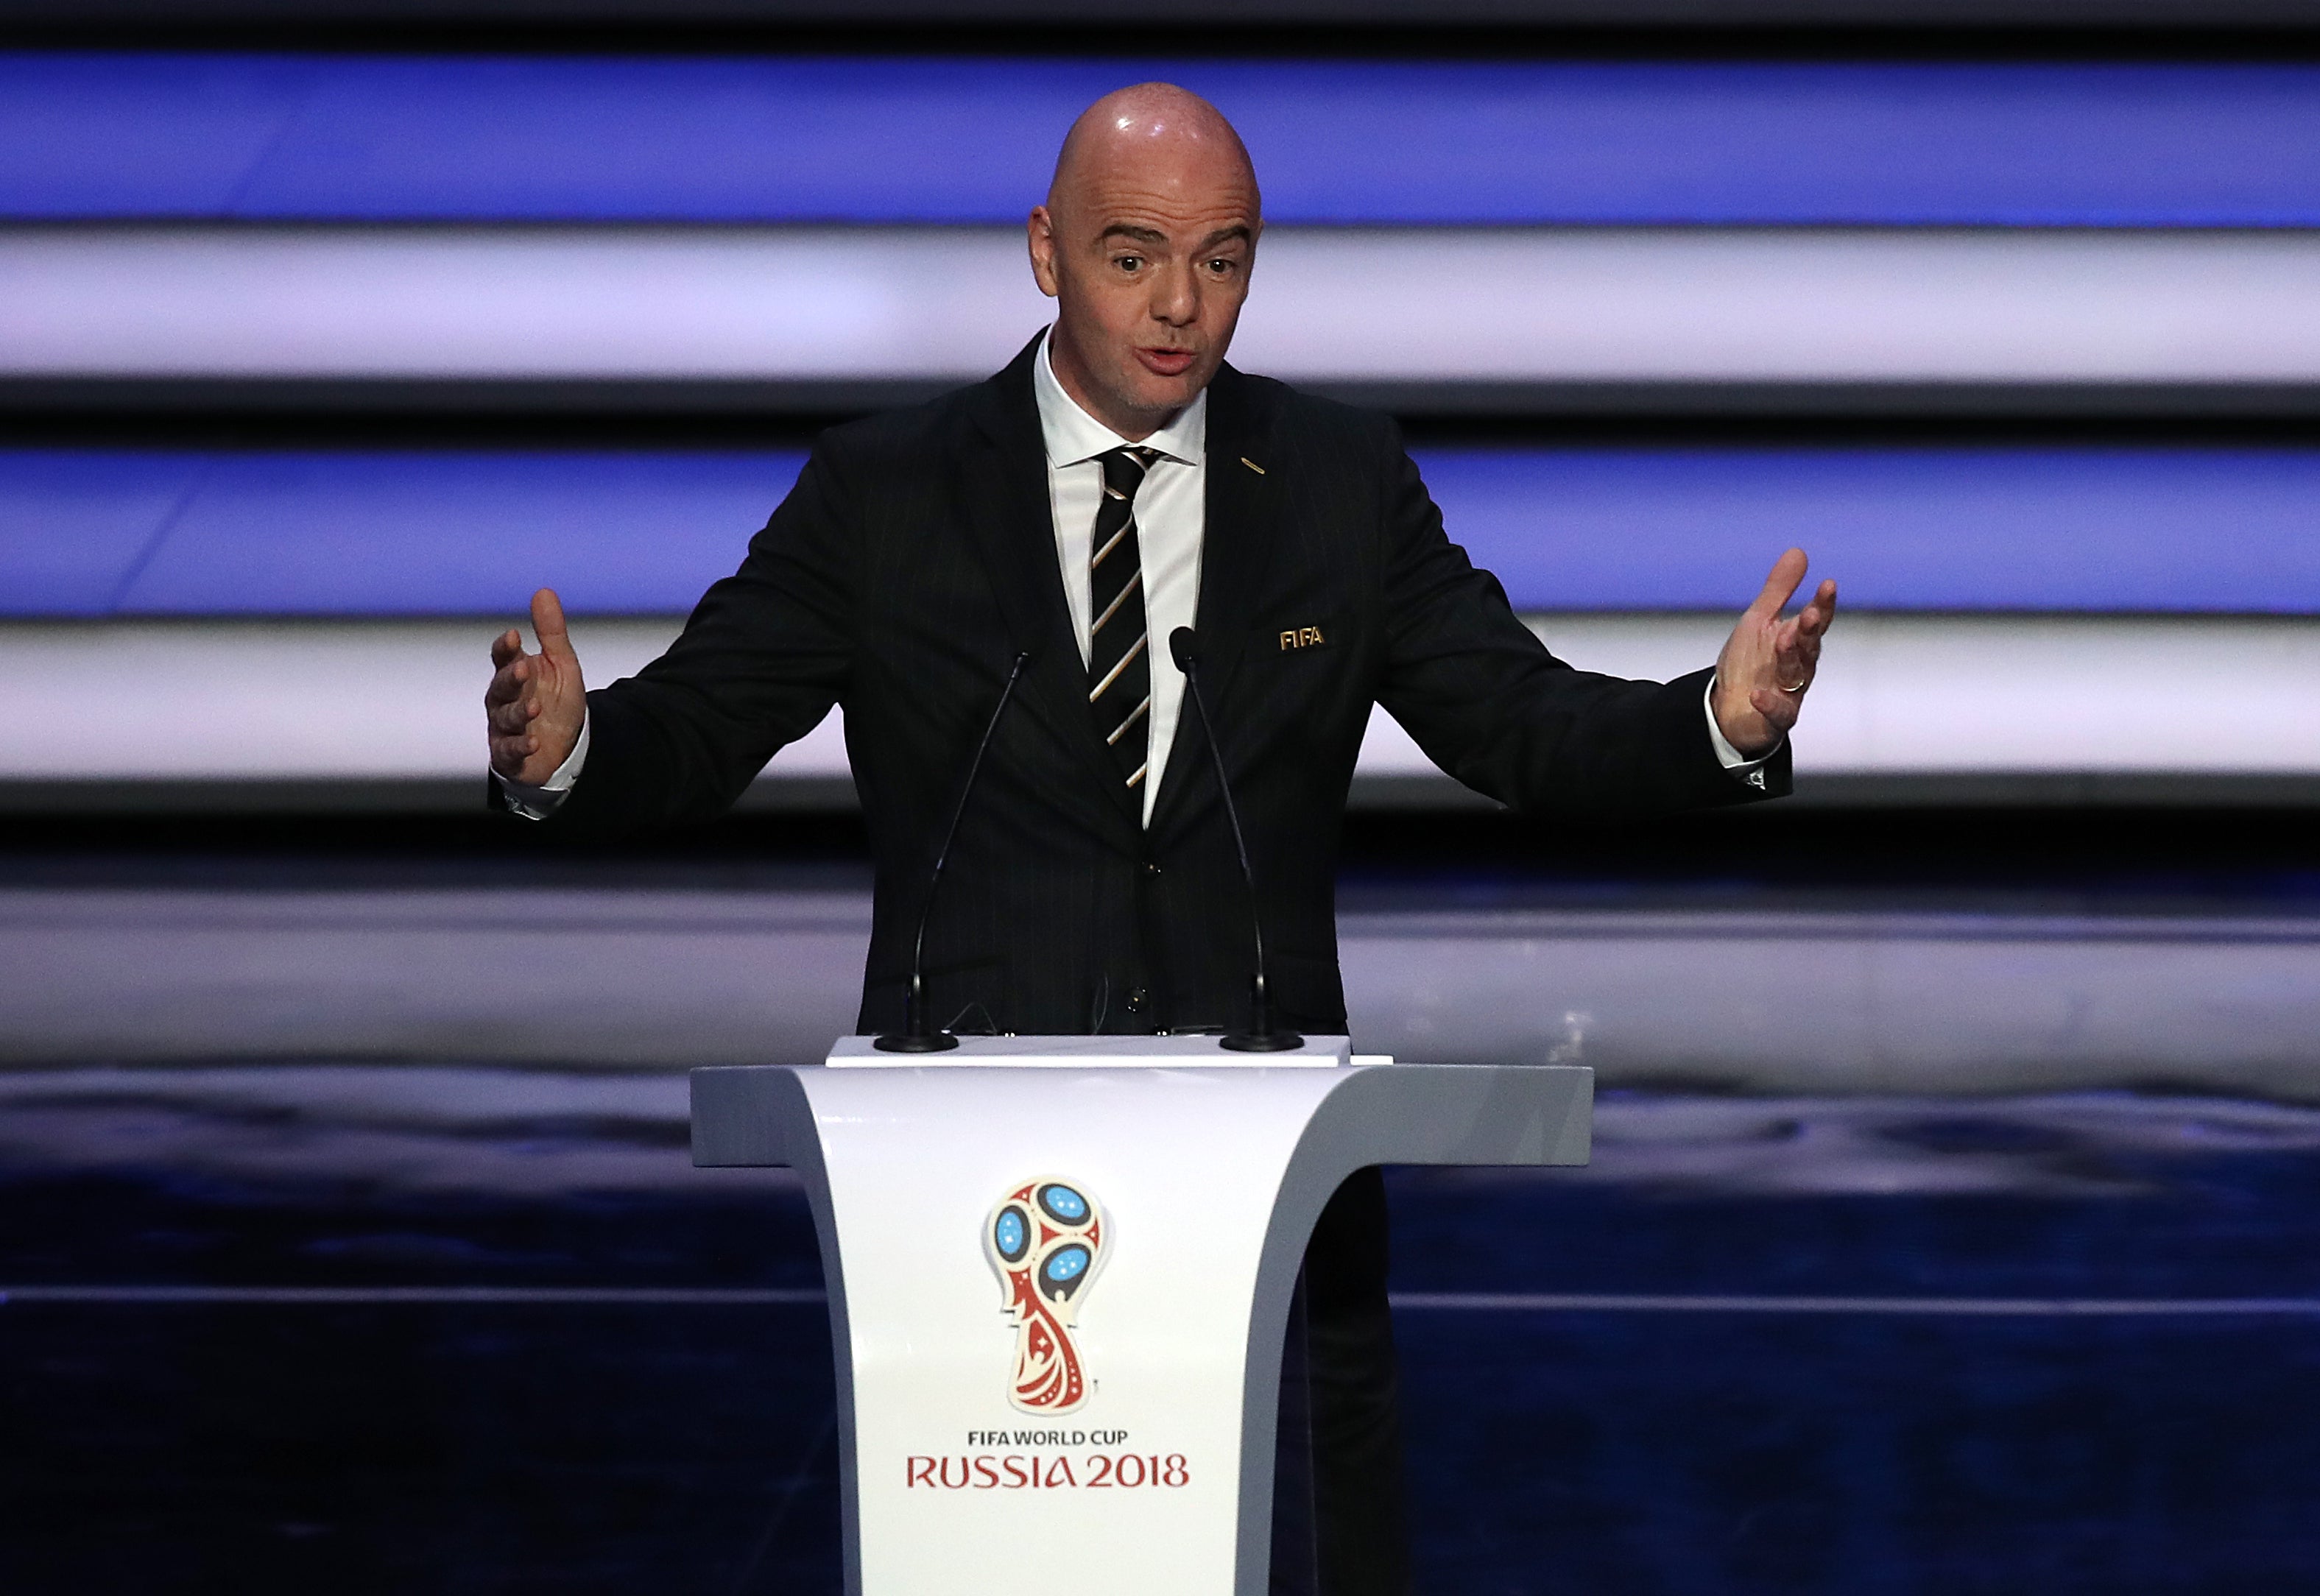 FIFA president Gianni Infantino made bizarre remarks about Africans risking death by migrating to Europe in a speech on Wednesday (Nick Potts/PA)